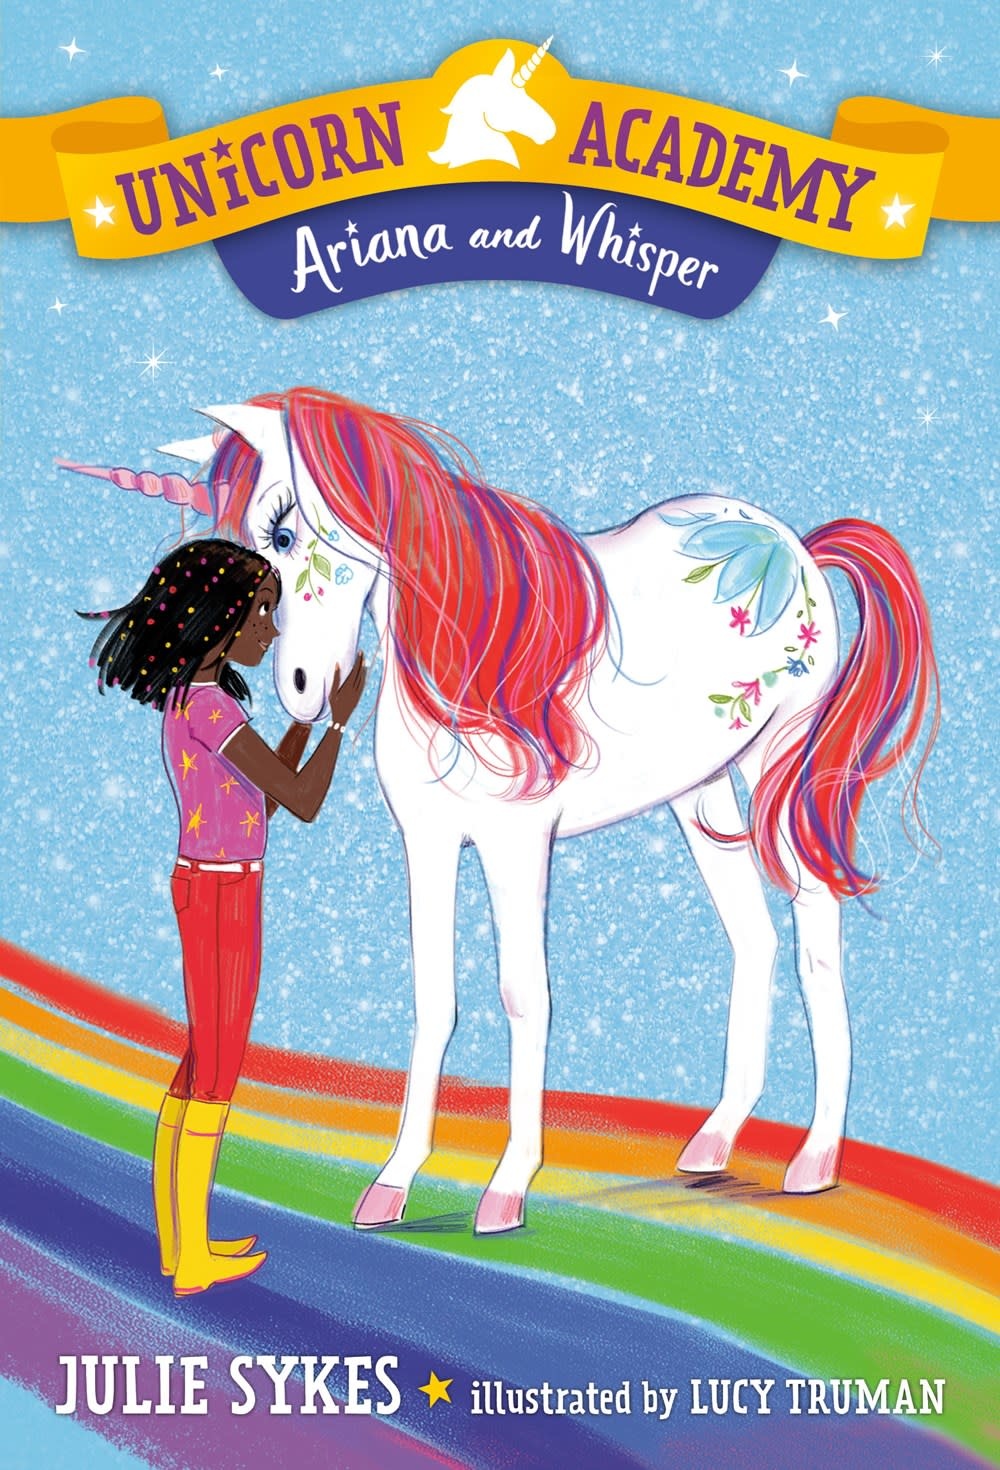 Random House Books for Young Readers Unicorn Academy #8 Ariana and Whisper